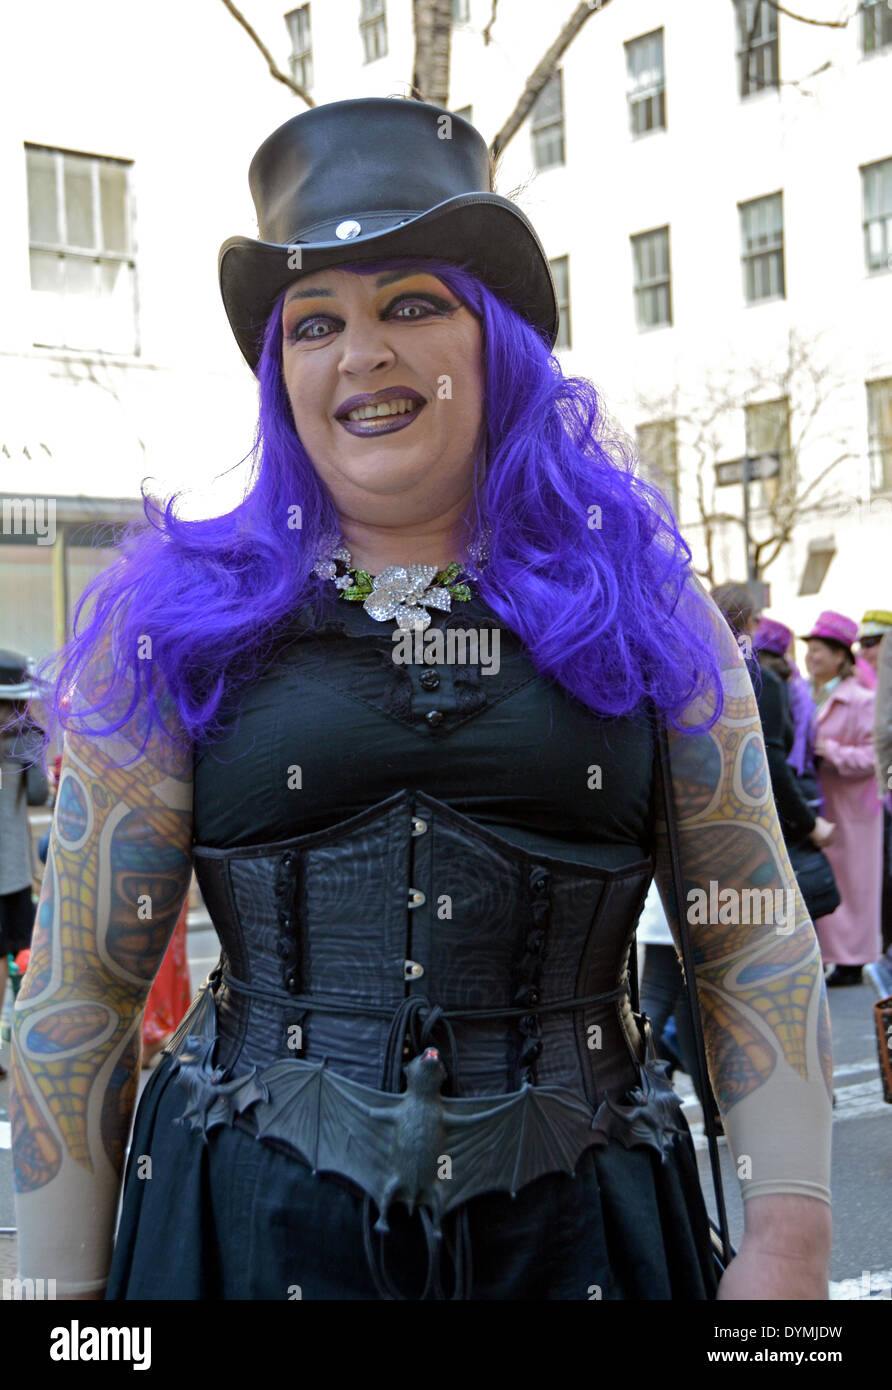 A woman with purple hair and a top hat & bats in her belt at the Easter Parade in Midtown Manhattan, New York City Stock Photo